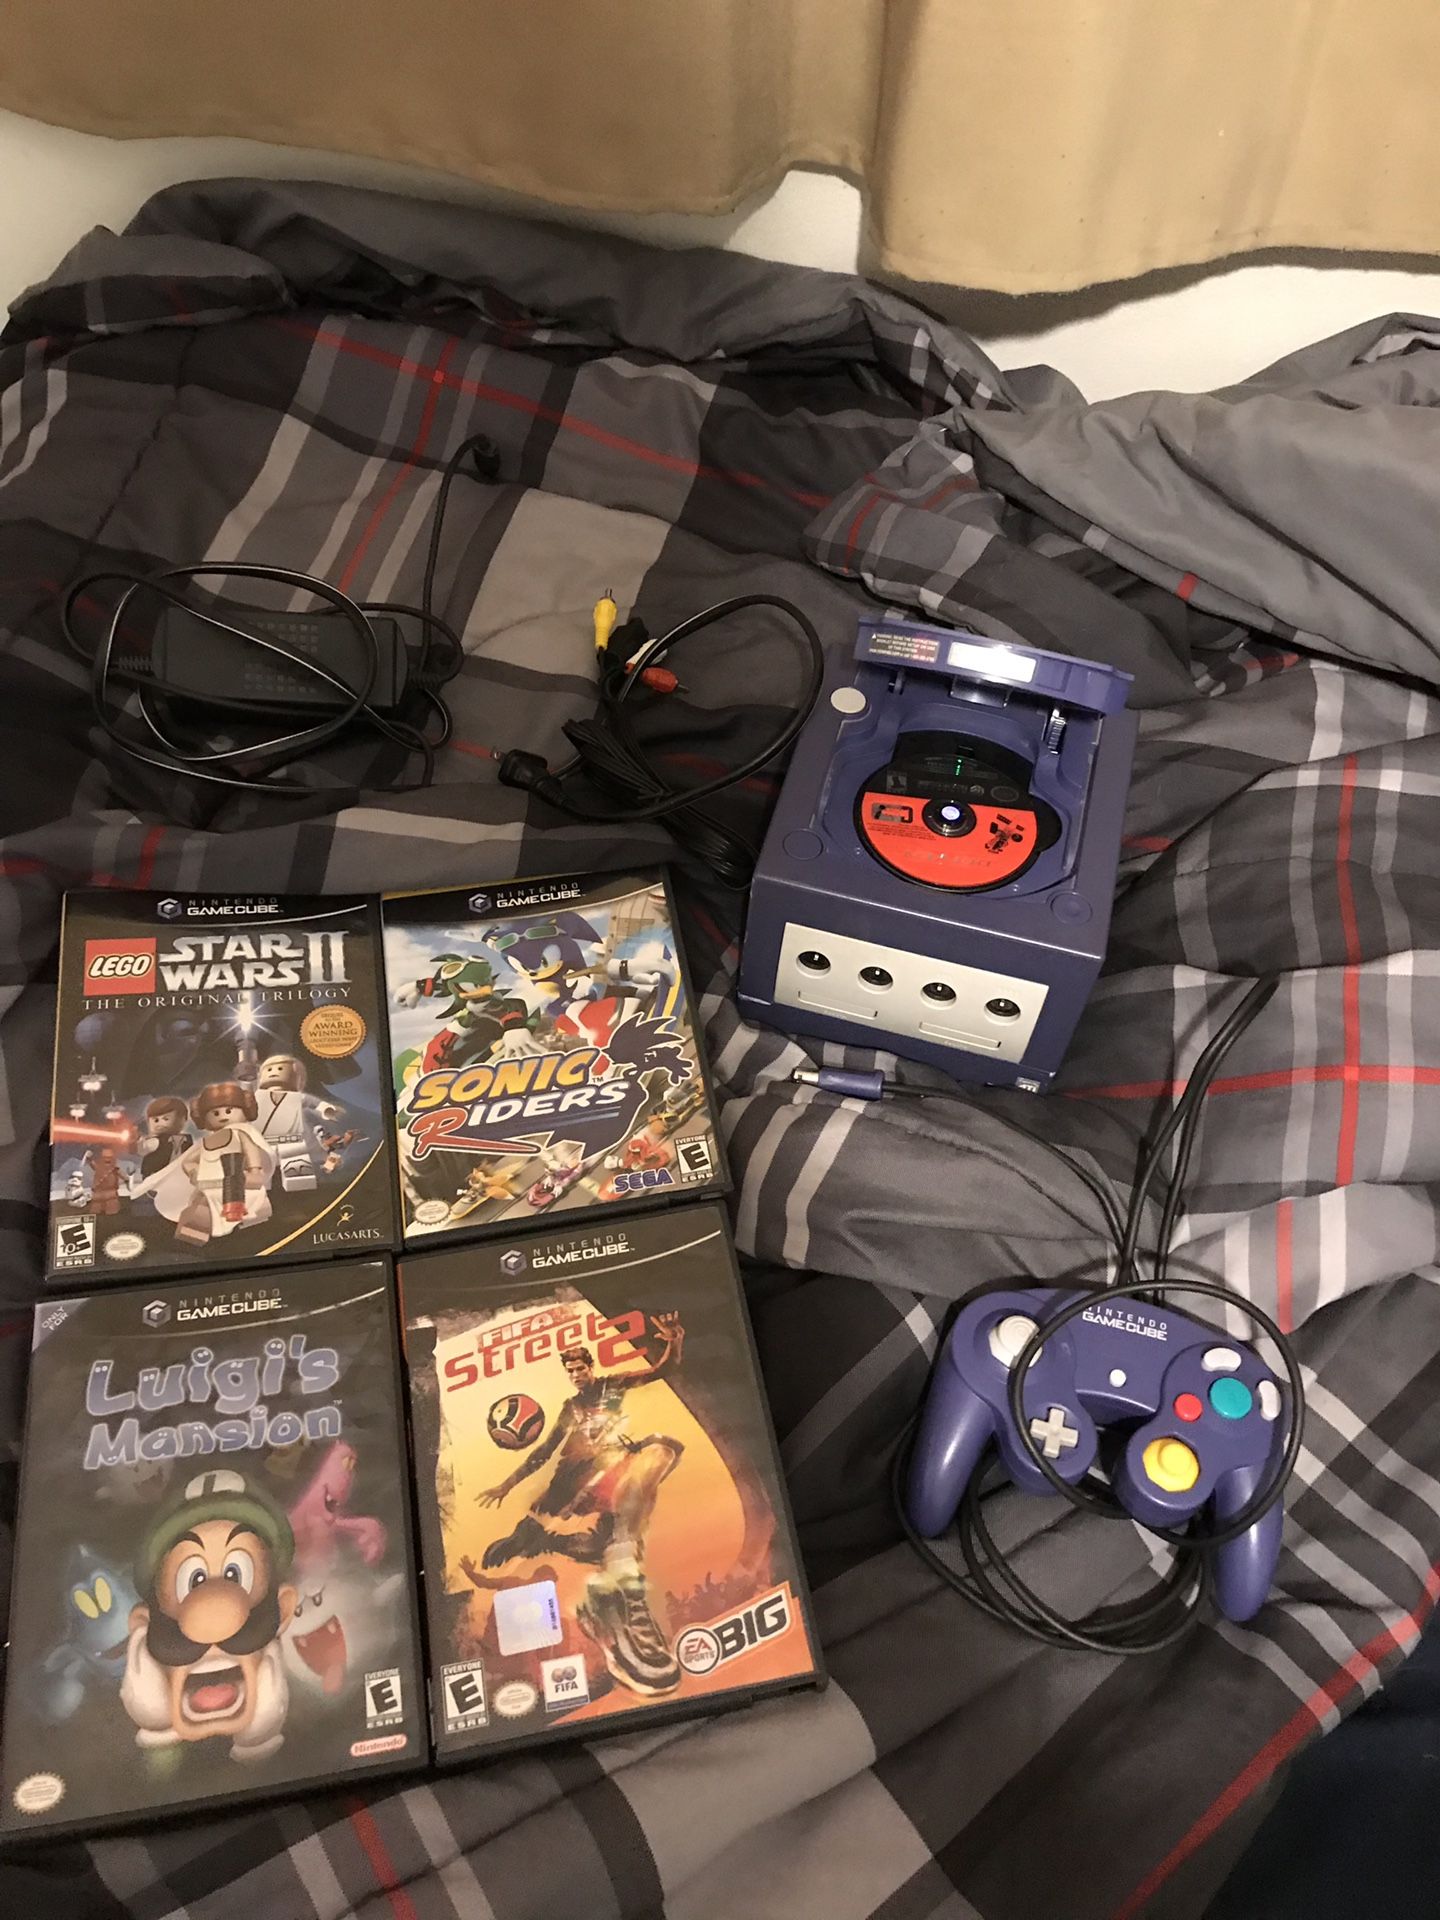 Nintendo gamecube with original controller, luigi's mansion, sonic riders , star wars, fifa street 2 and driver with orinal cases